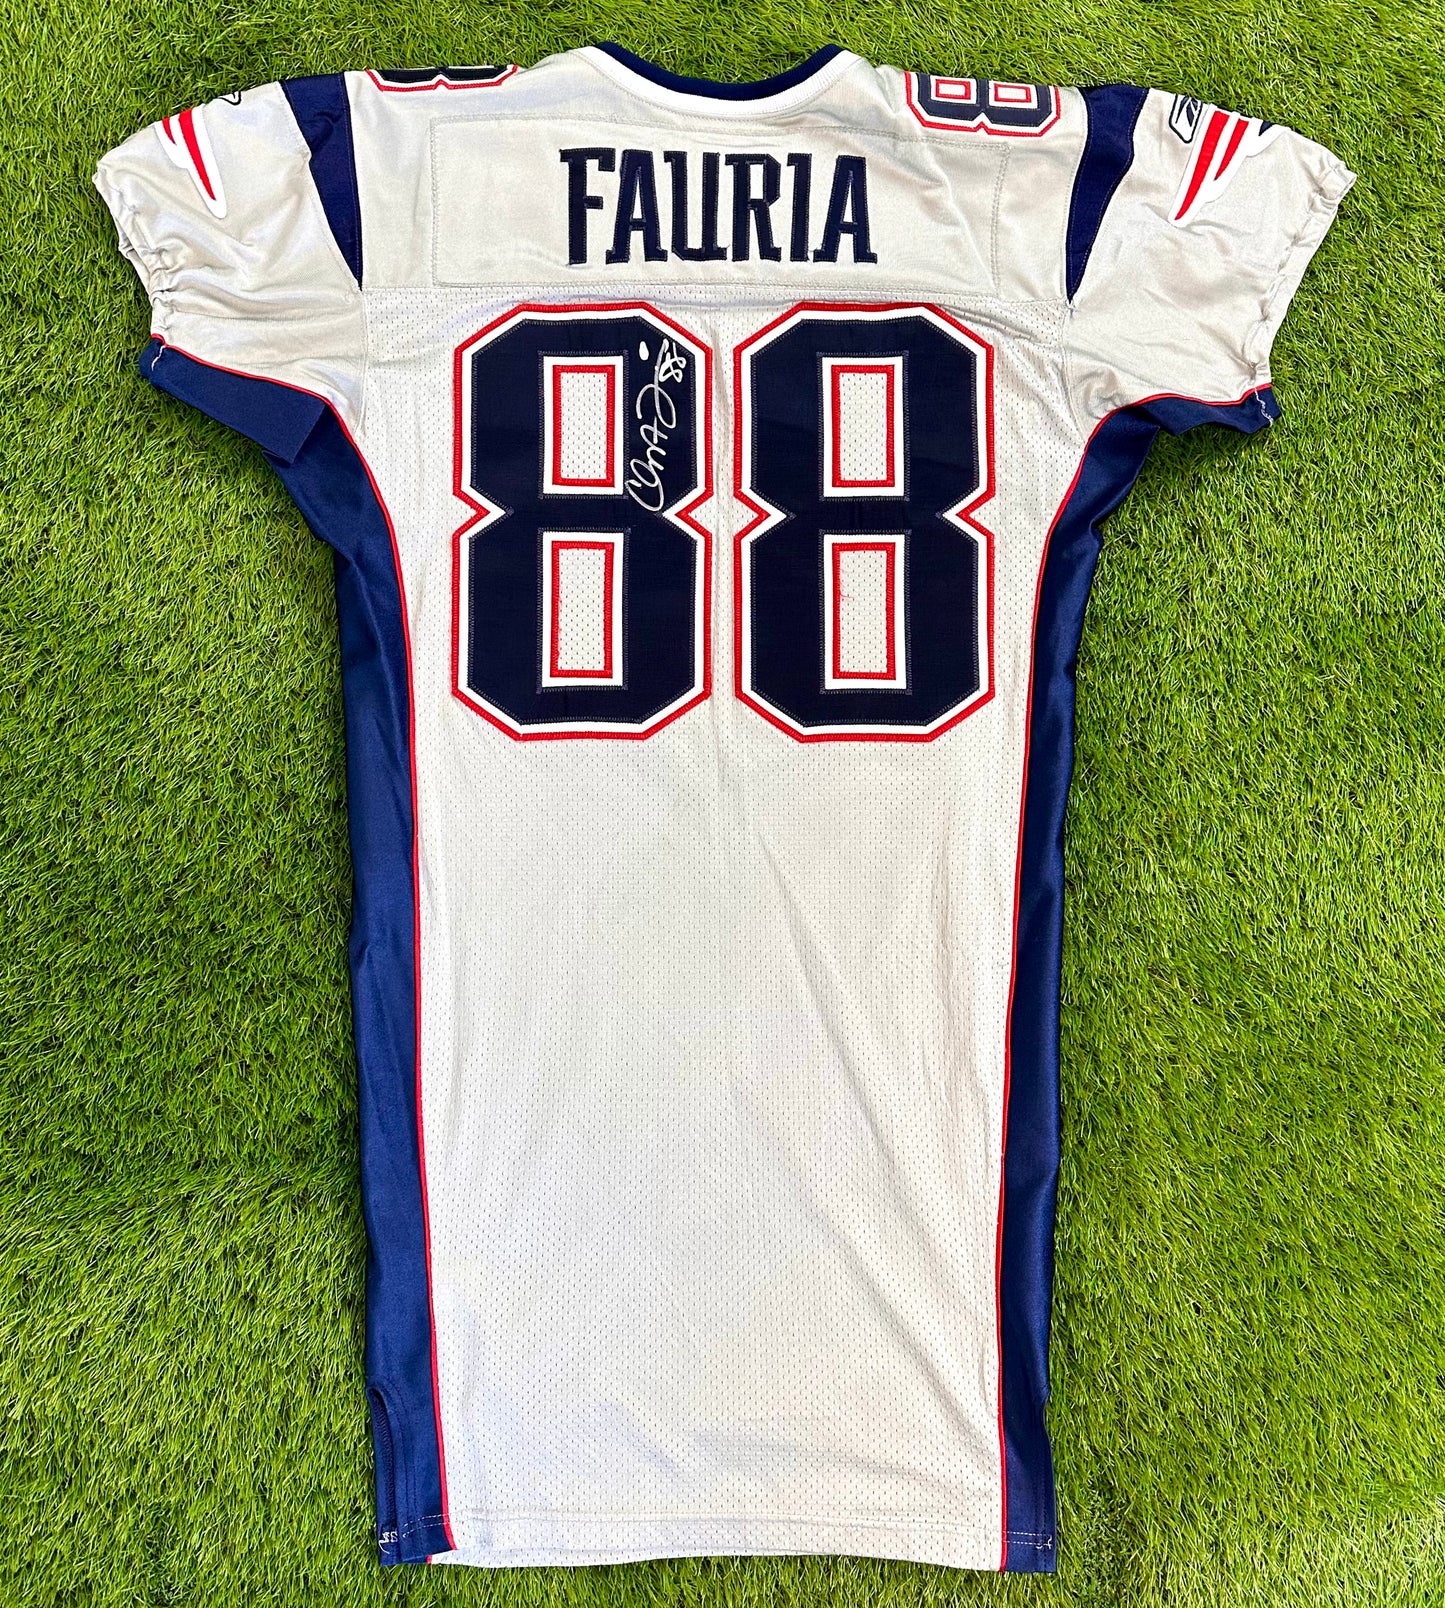 New England Patriots Christian Fauria 2003 Game Issued (Worn?) Silver Alternate NFL Football Jersey (48/XL)